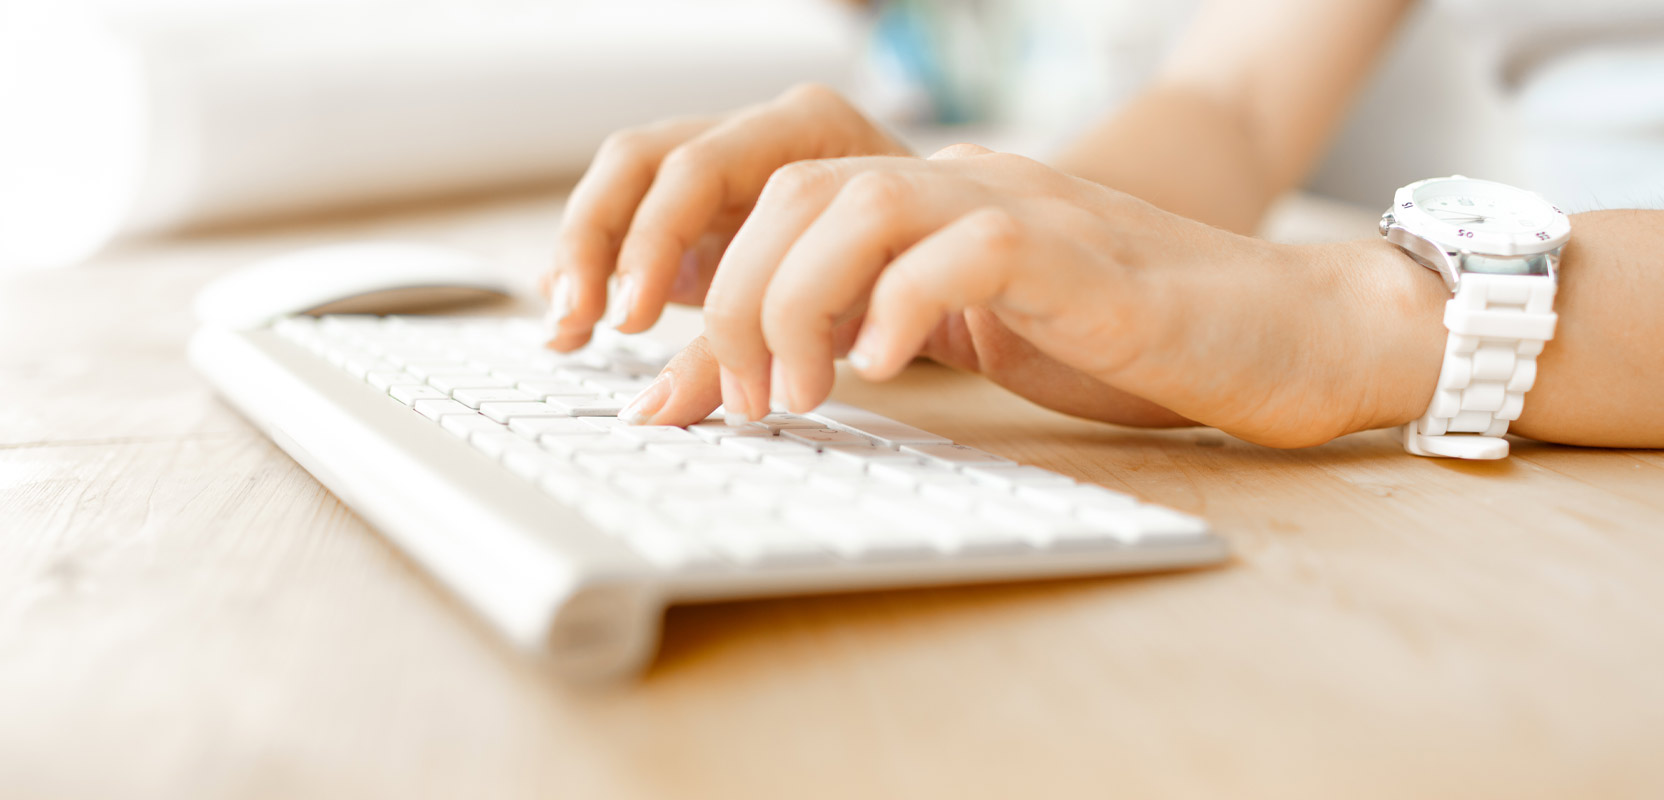 Closeup of a woman's hands as she works on a data entry side hustle from her home office